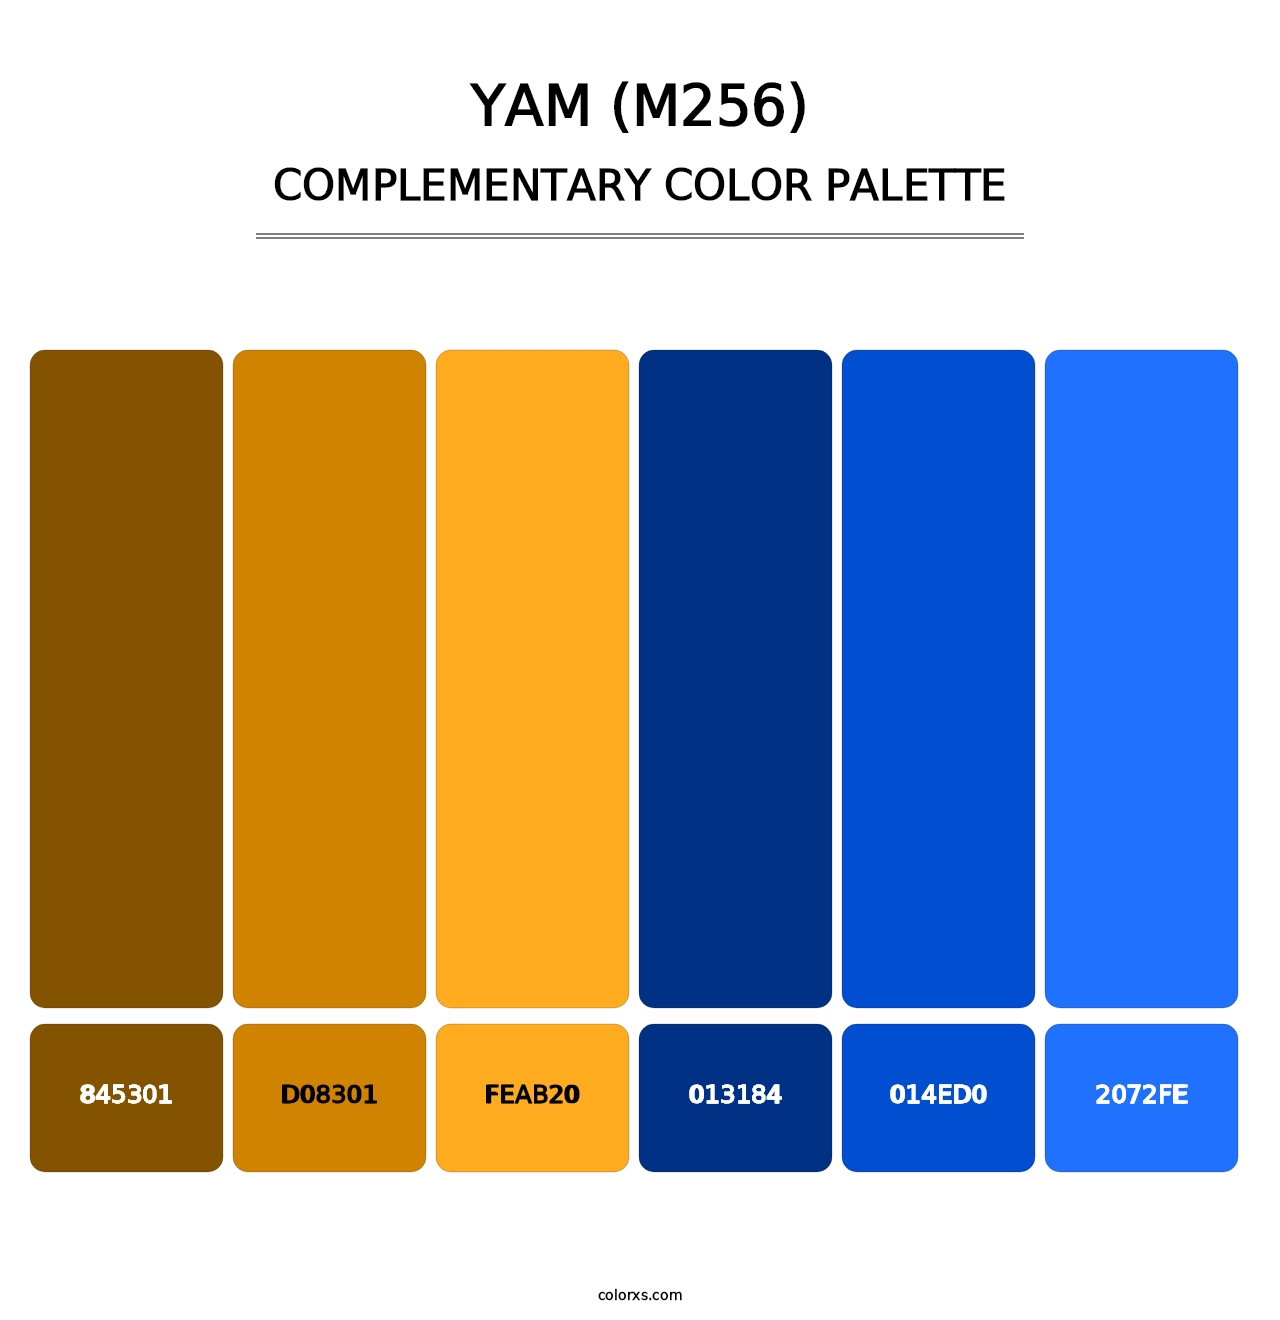 Yam (M256) - Complementary Color Palette